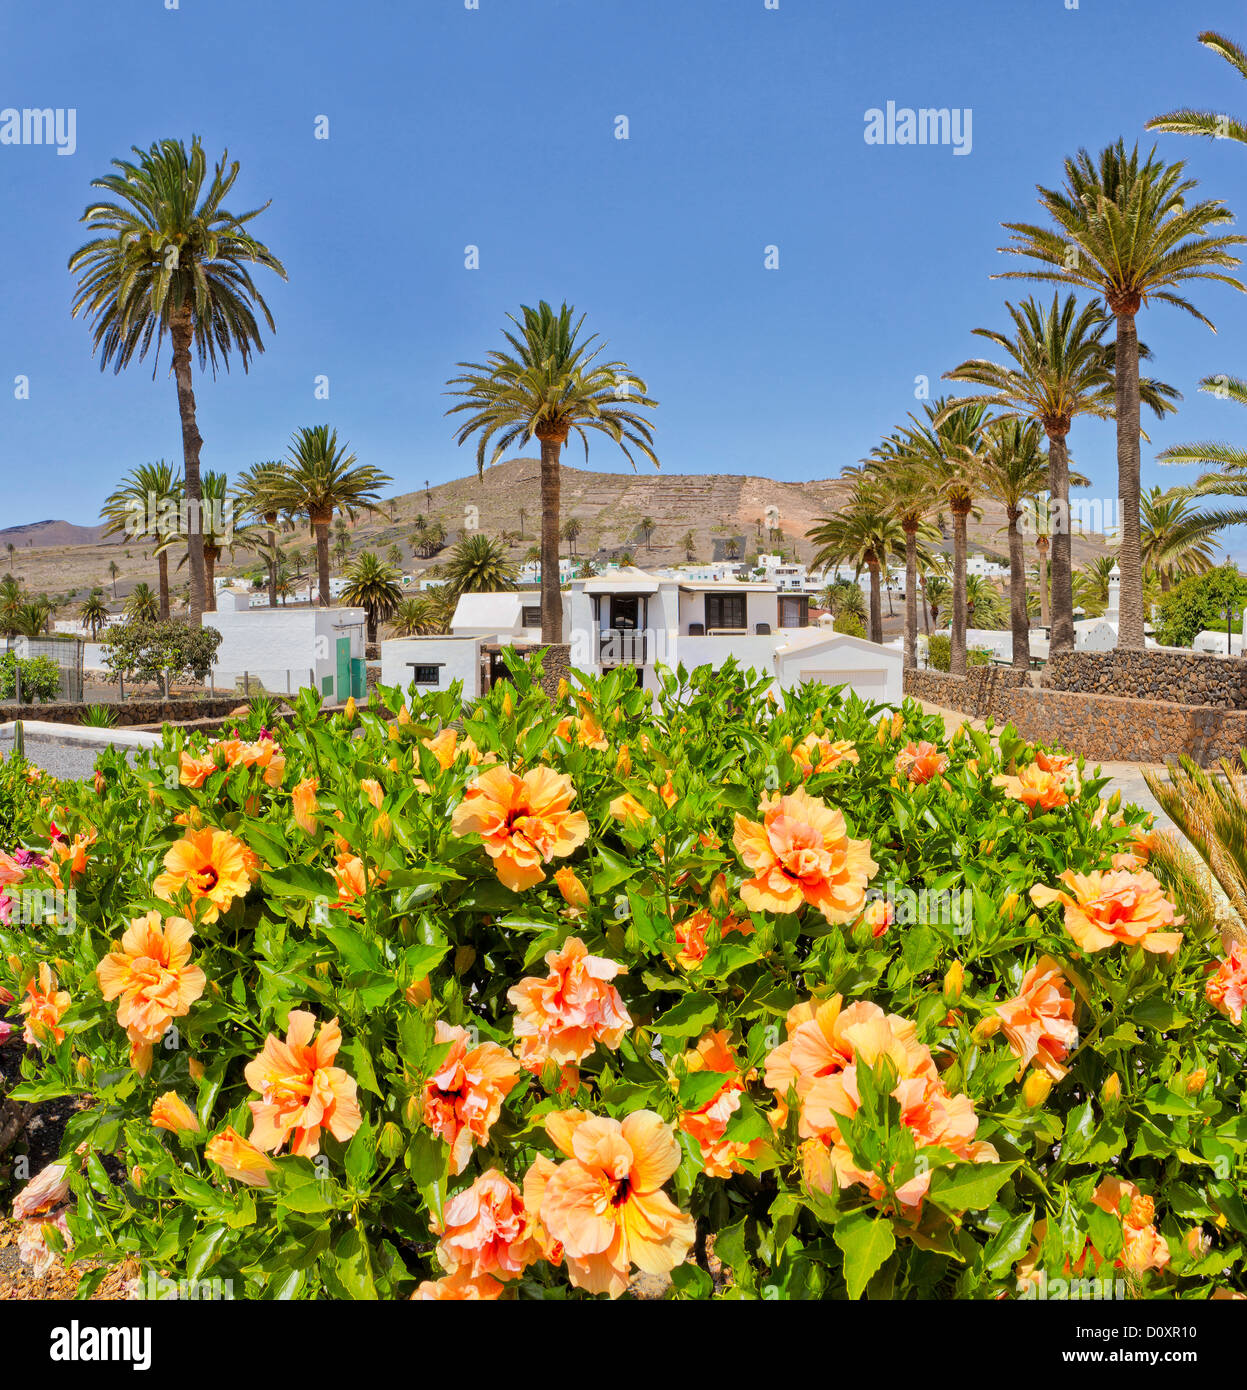 Spain, Lanzarote, Haria, village of the 1000 palm trees, city, village, flowers, trees, summer, mountains, hills, Canary Islands Stock Photo